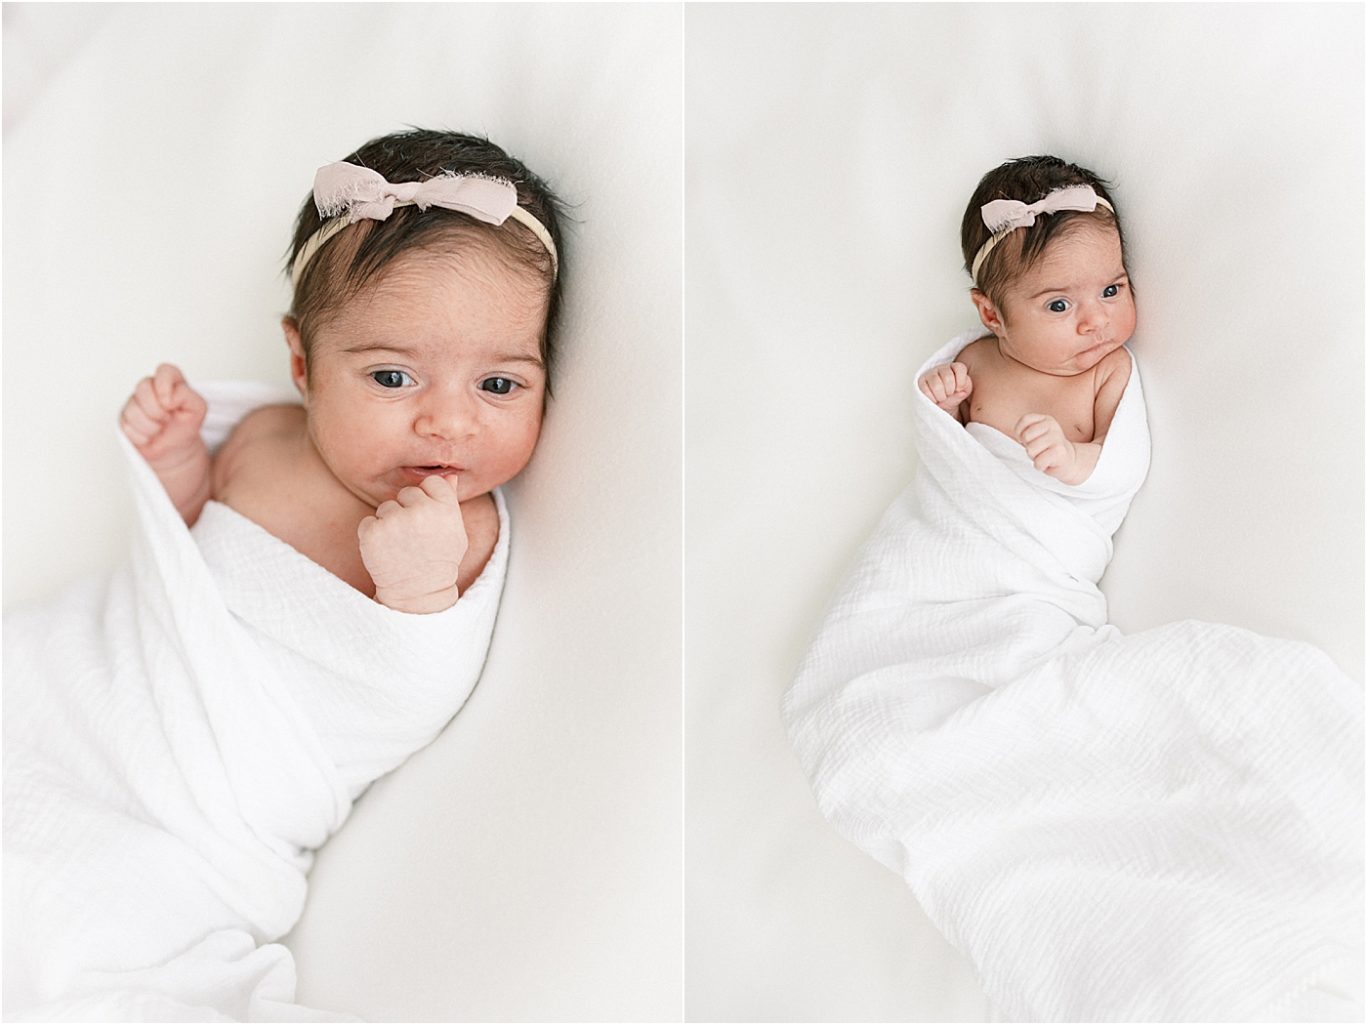 Newborn baby girl swaddled on a white blanket for newborn photos with Noblesville Indiana Newborn Photographer, Lindsay Konopa Photography.